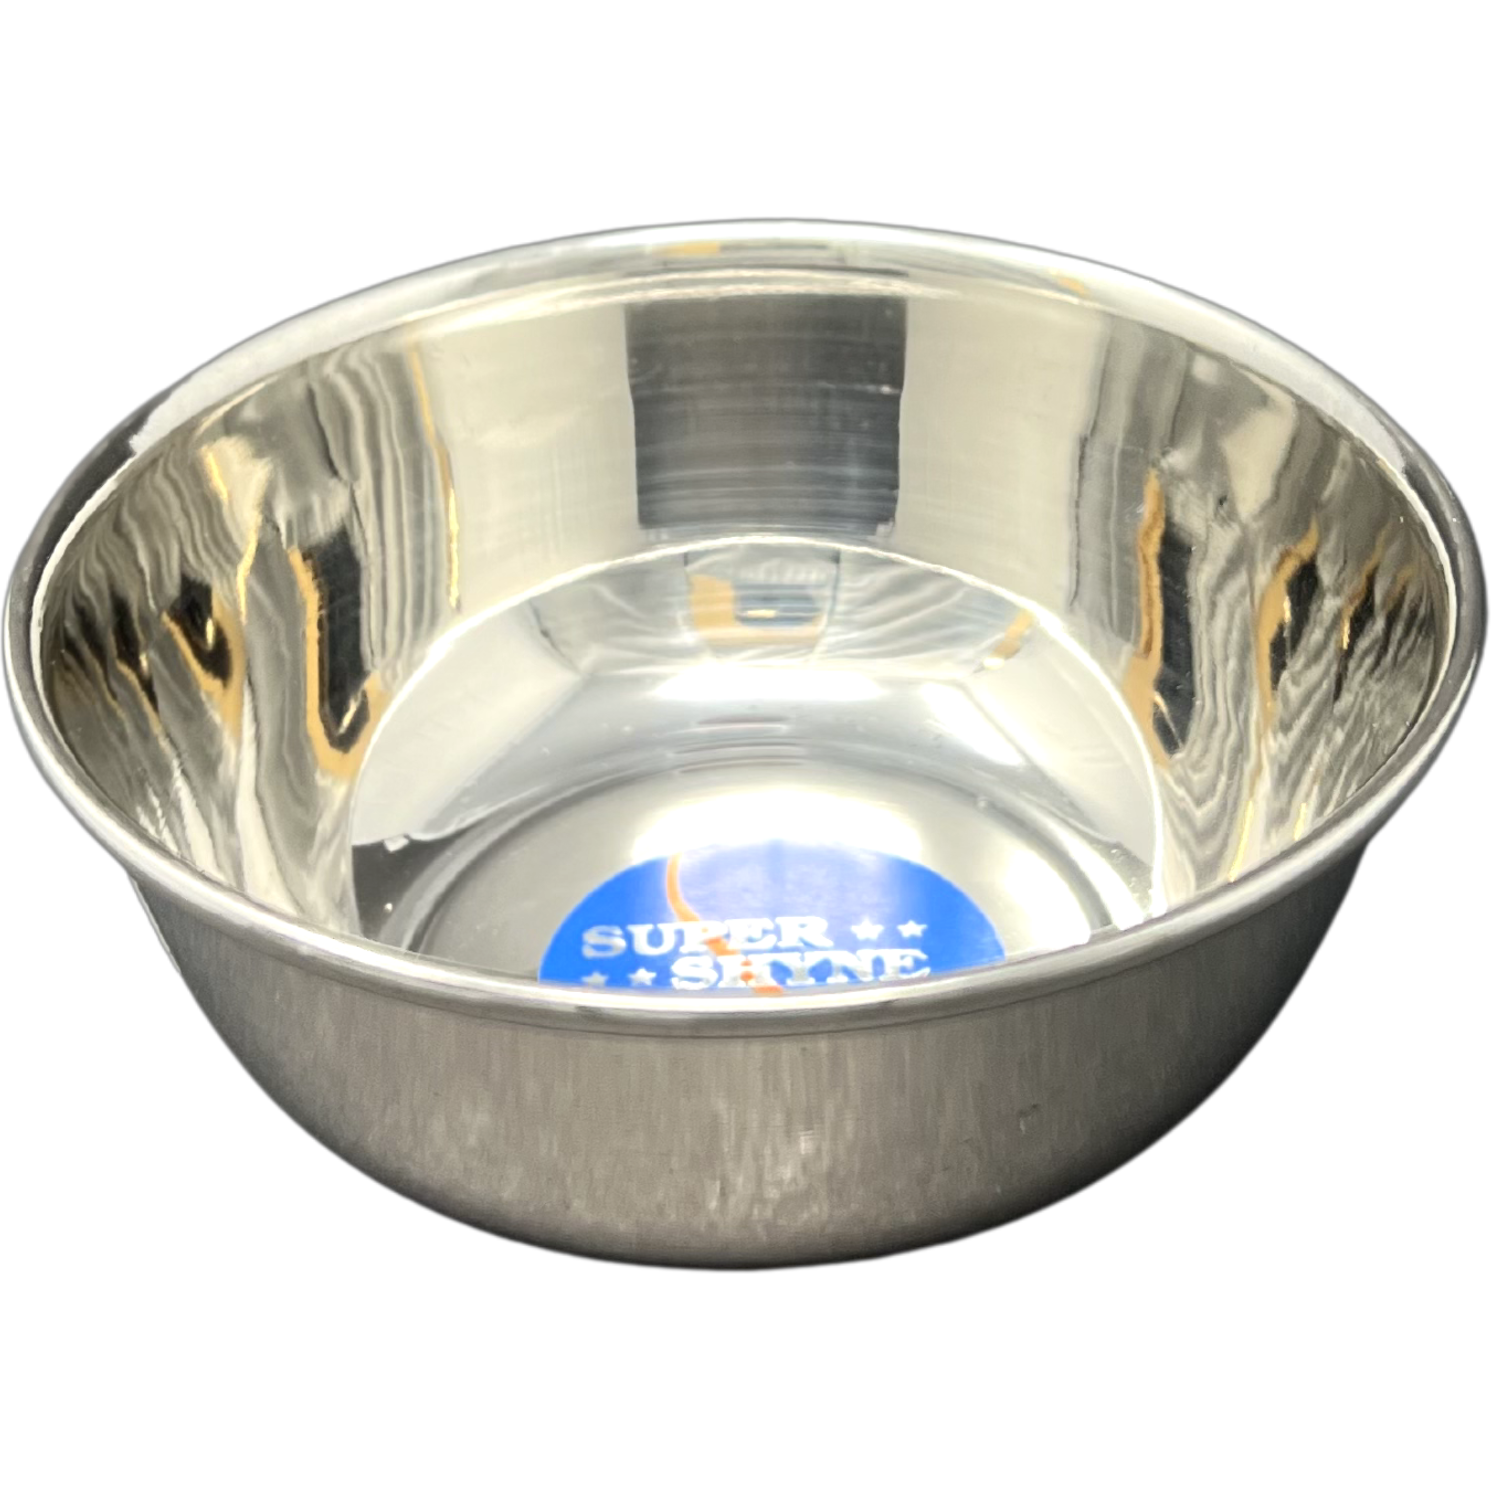 Case of 12 - Super Shyne Stainless Steel Mini Bowl - 3 Inch